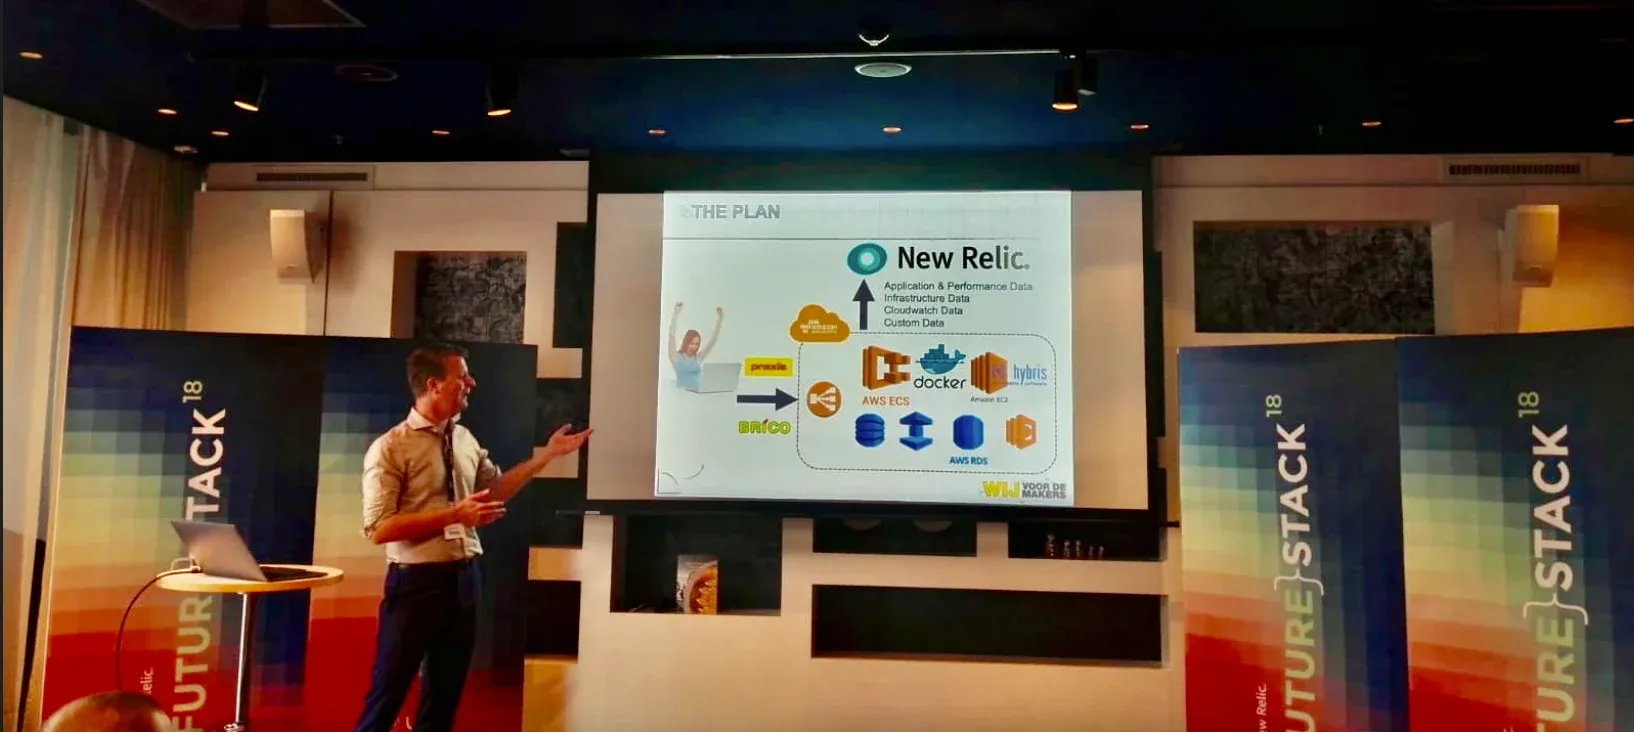 

Data-driven solutions for cloud, infrastructure and applications: New Relic.